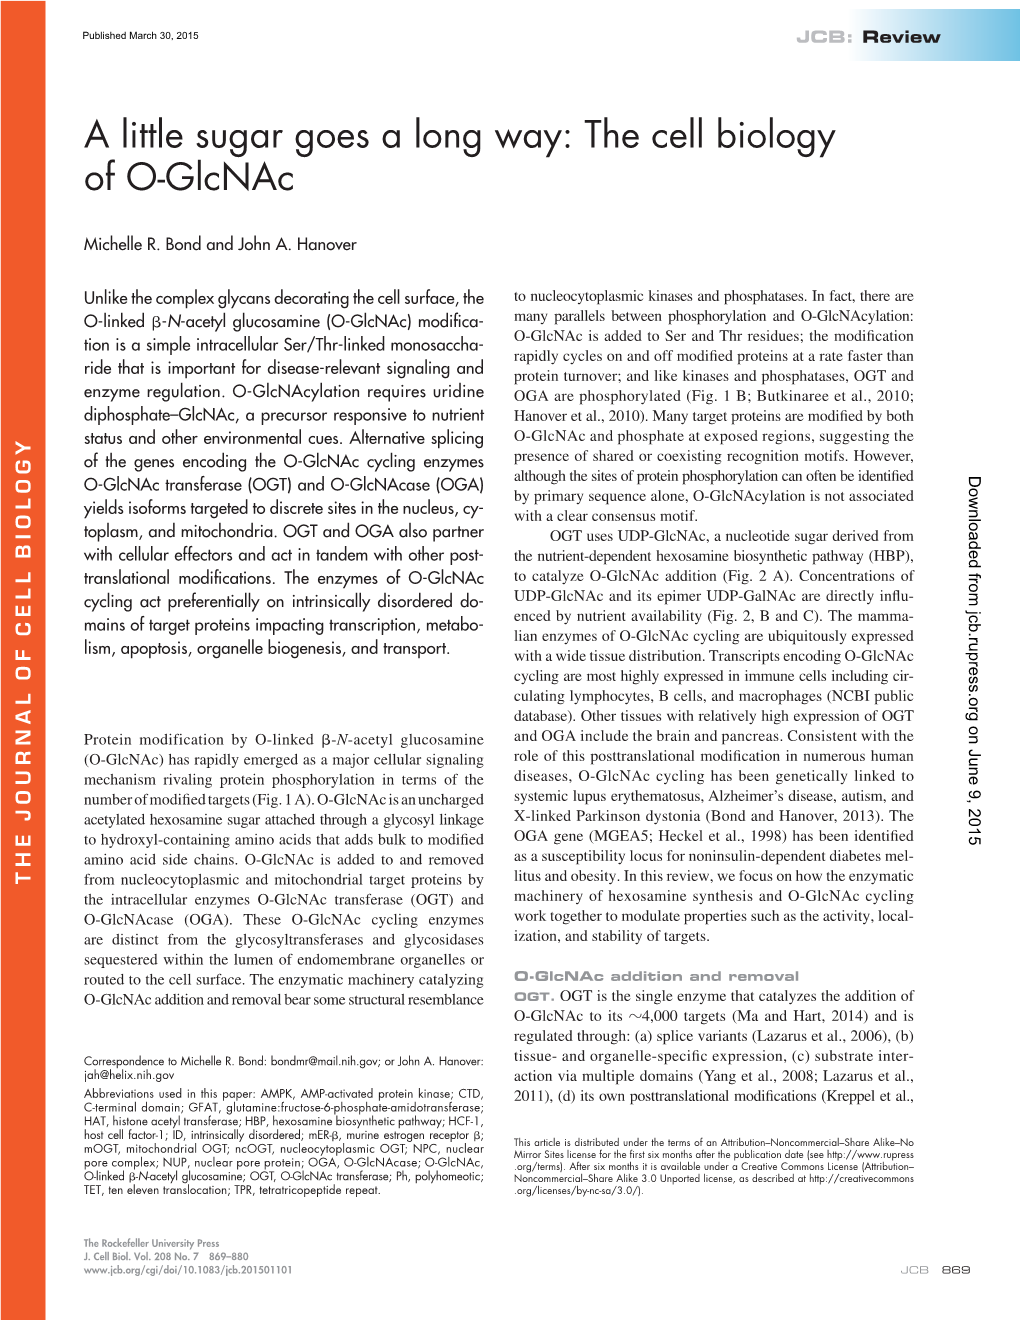 A Little Sugar Goes a Long Way: the Cell Biology of O-Glcnac